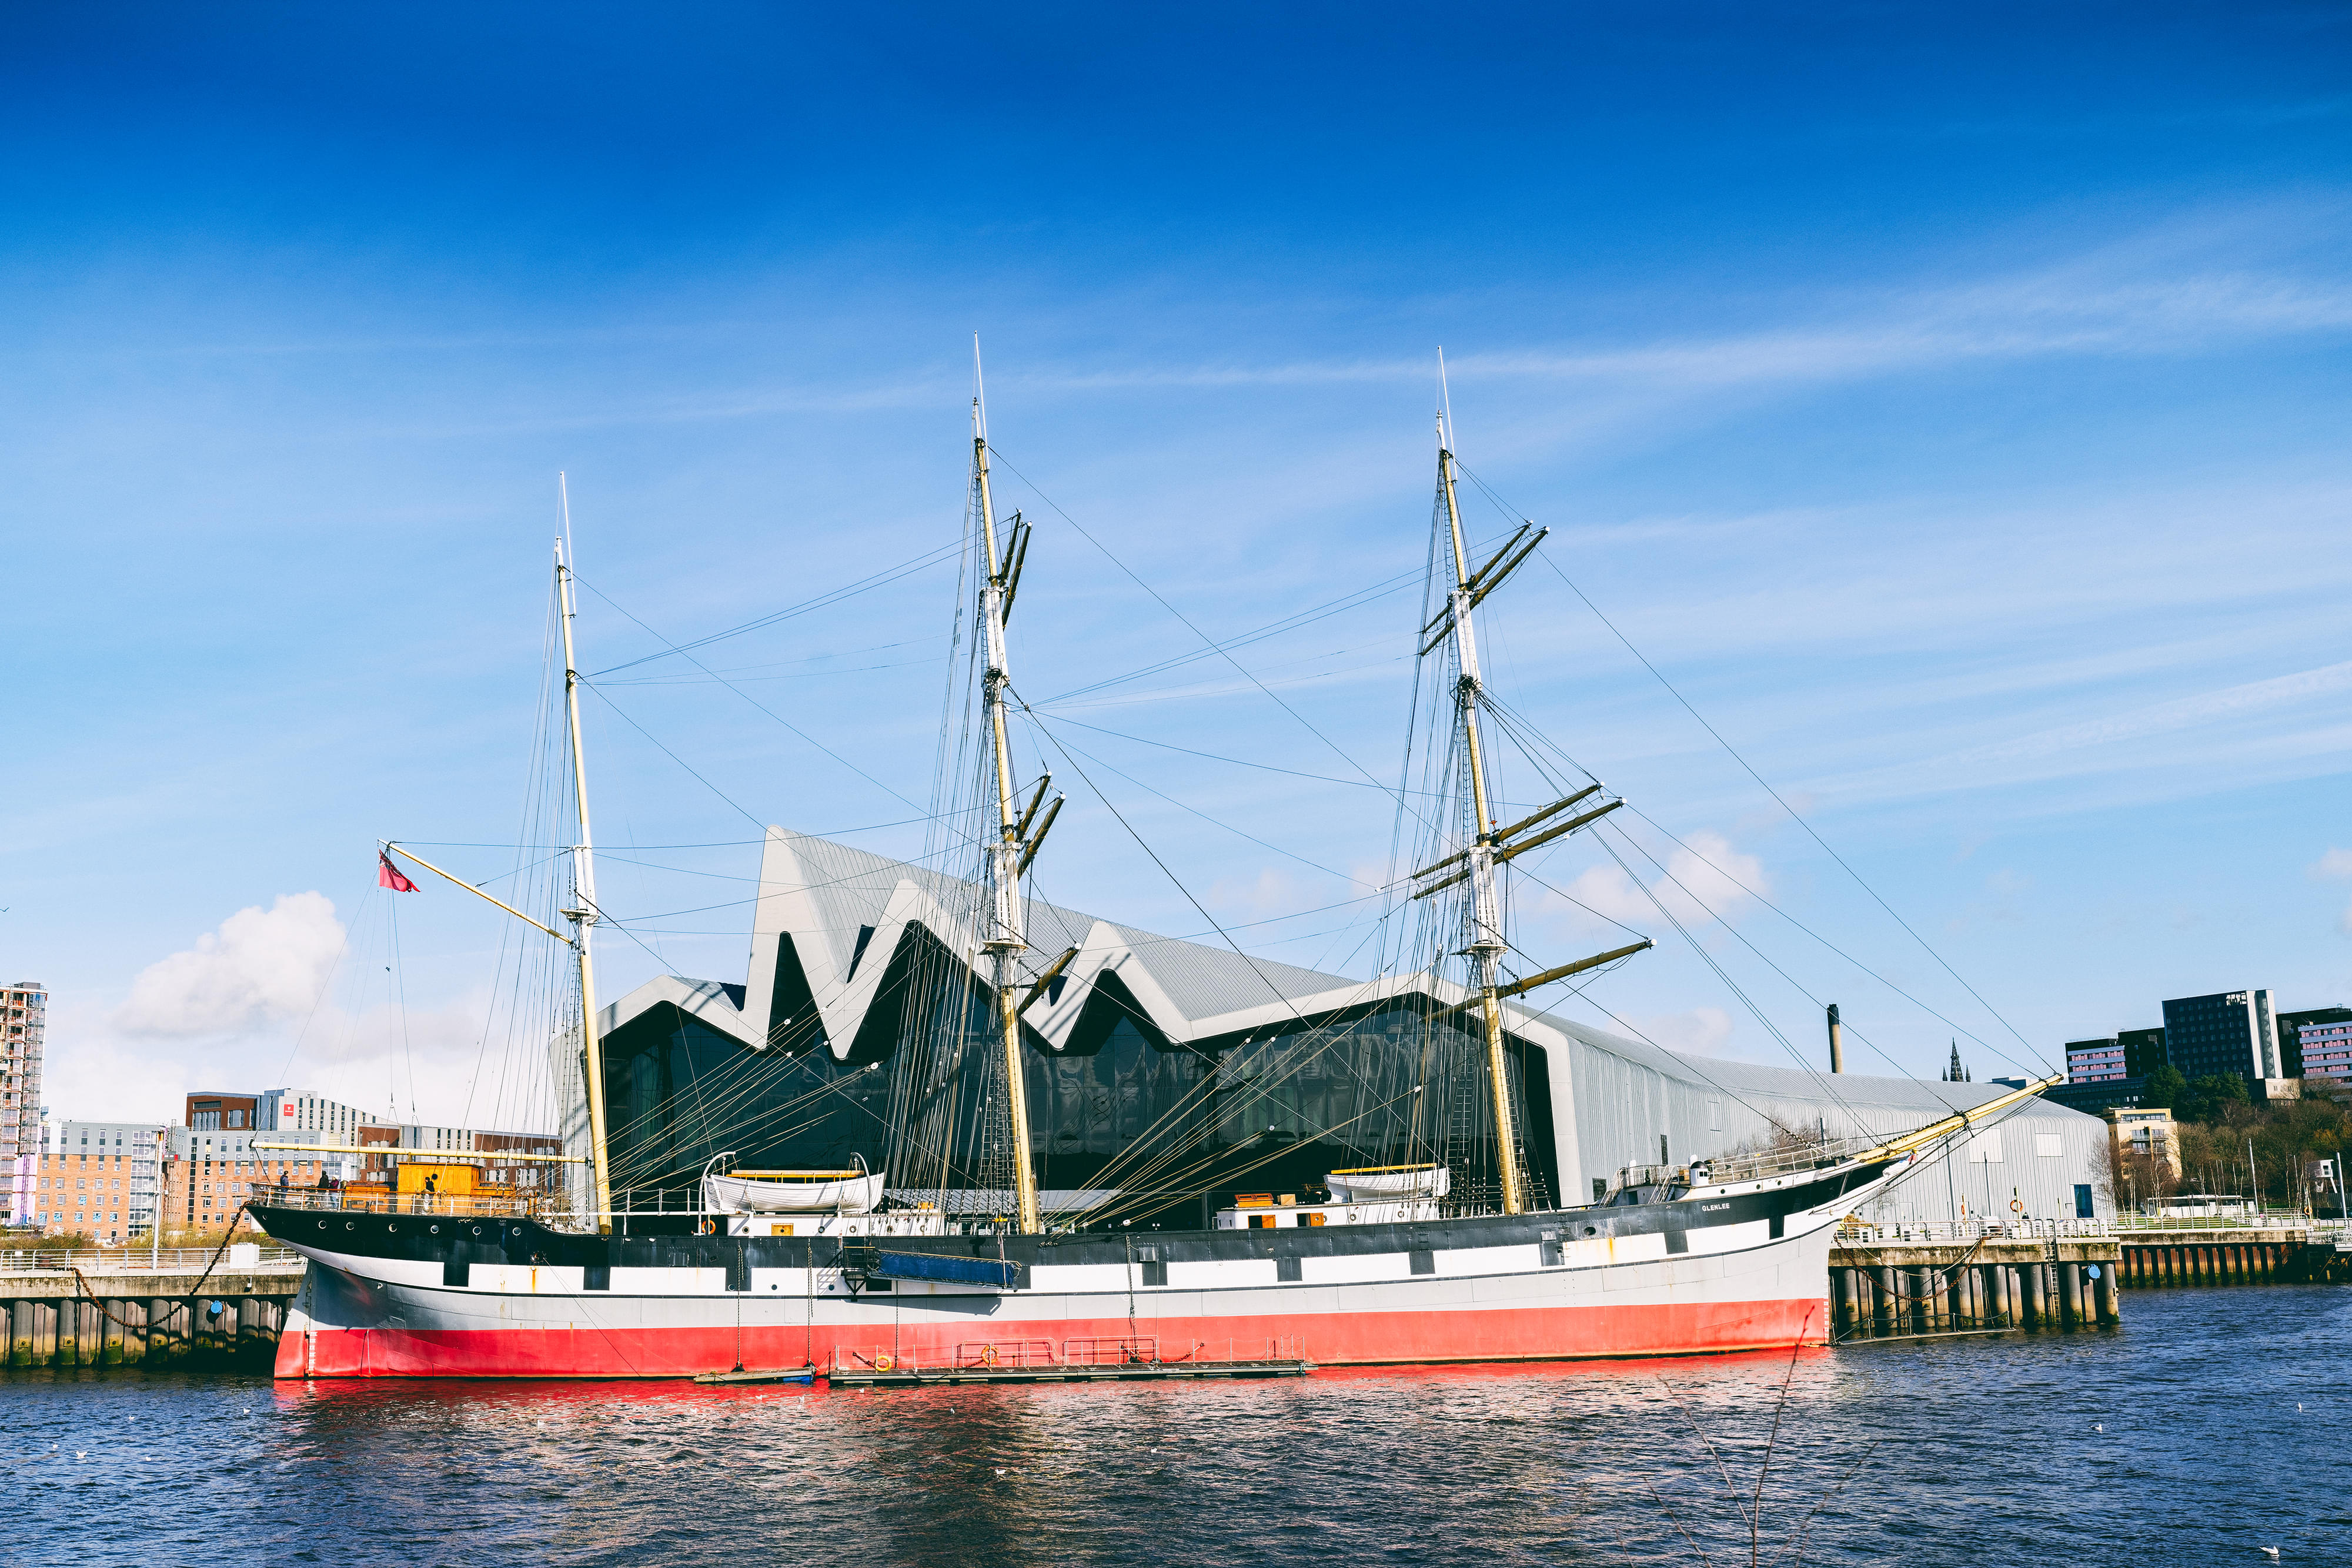 Riverside Museum And Tall Ship